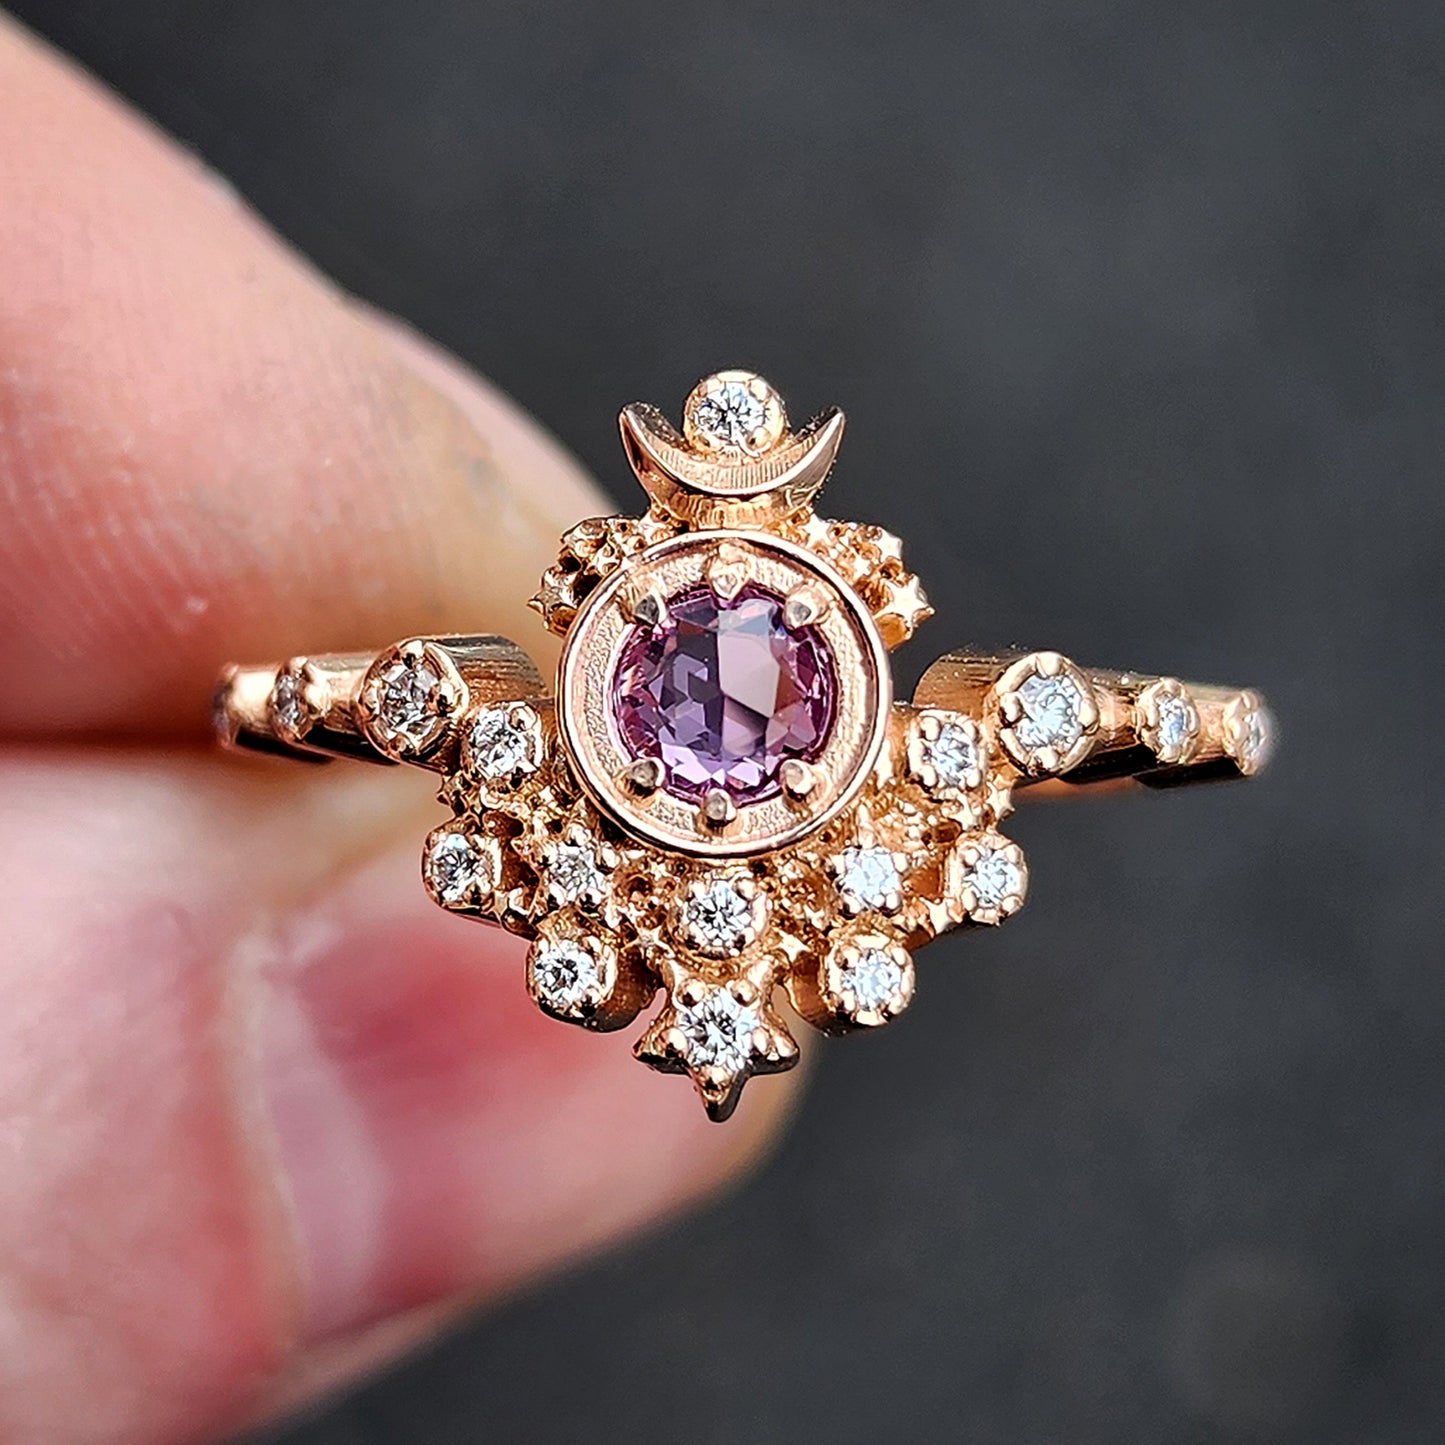 Rose Cut Purple Sapphire Moon Witch Engagement Ring with Diamonds and Stardust - 14k Rose Gold